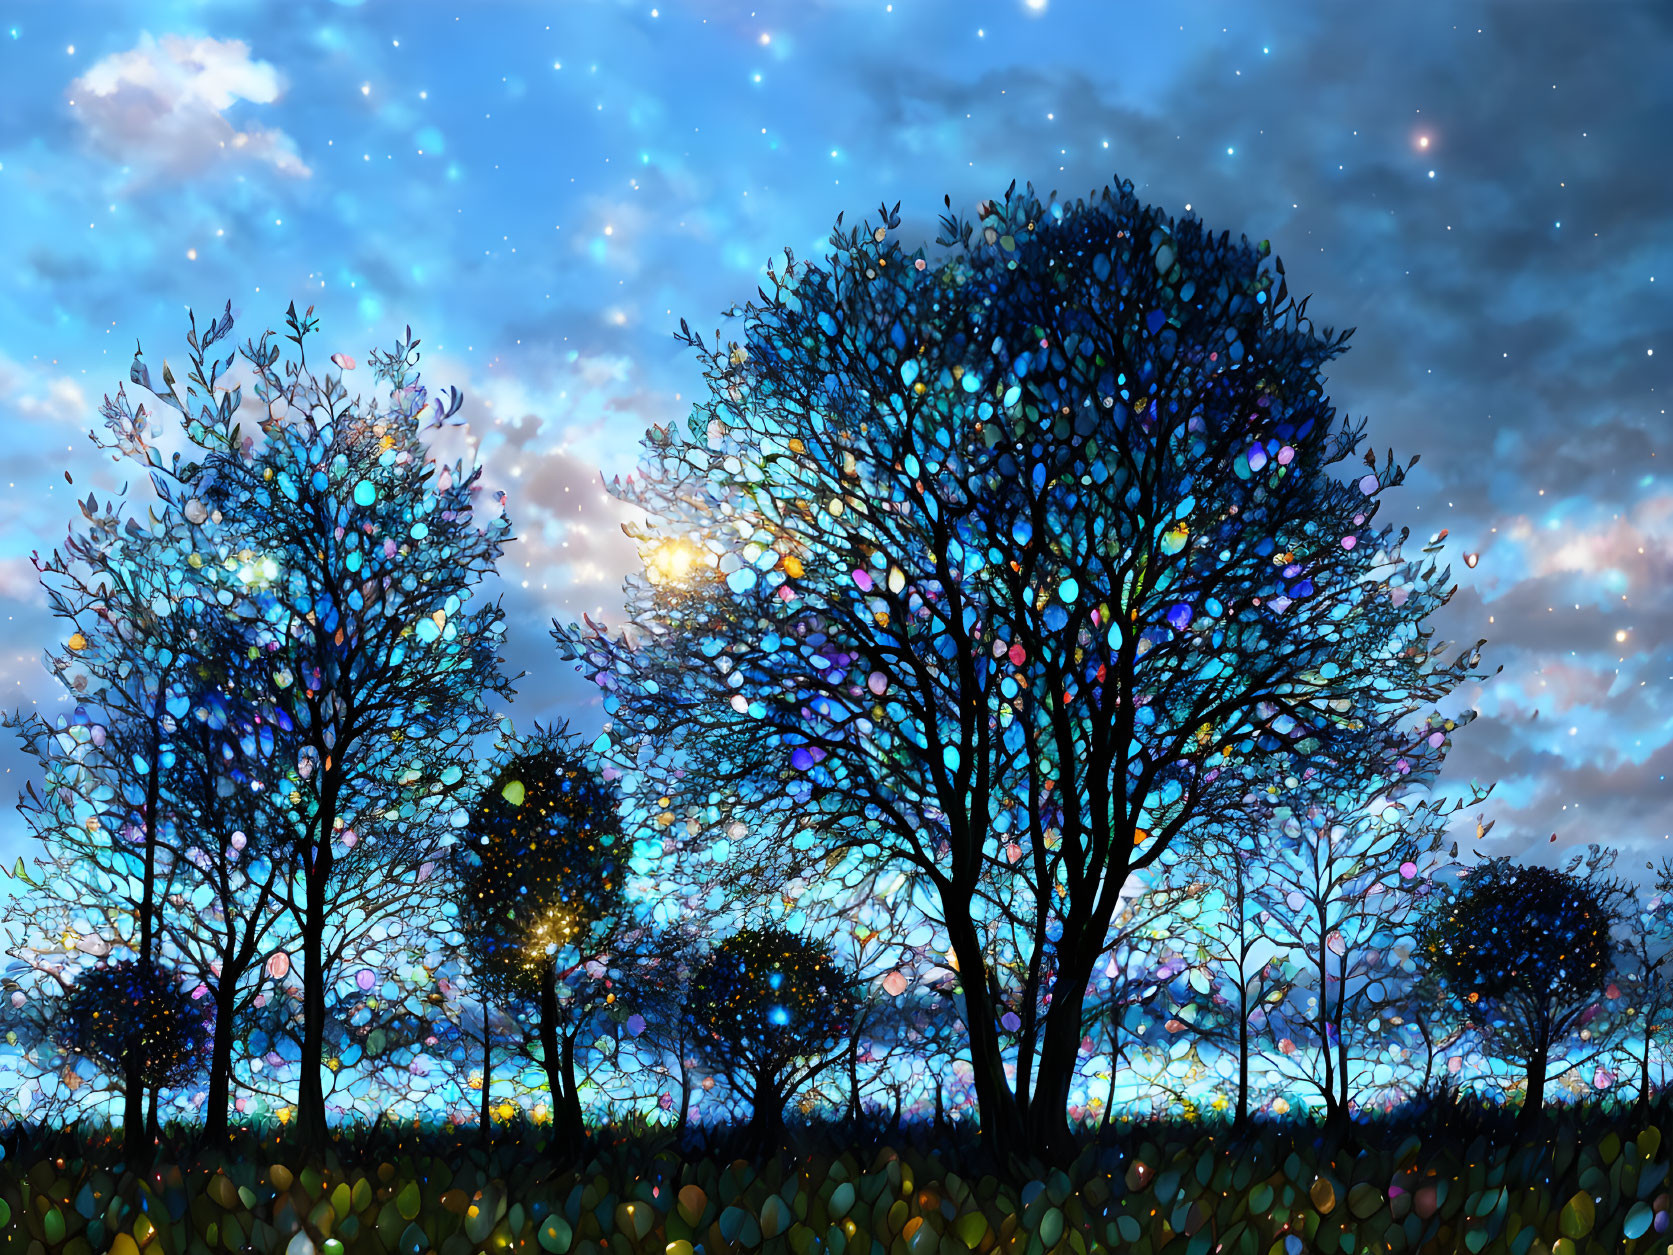 Colorful Trees Under Starry Night Sky with Moon and Glowing Foliage